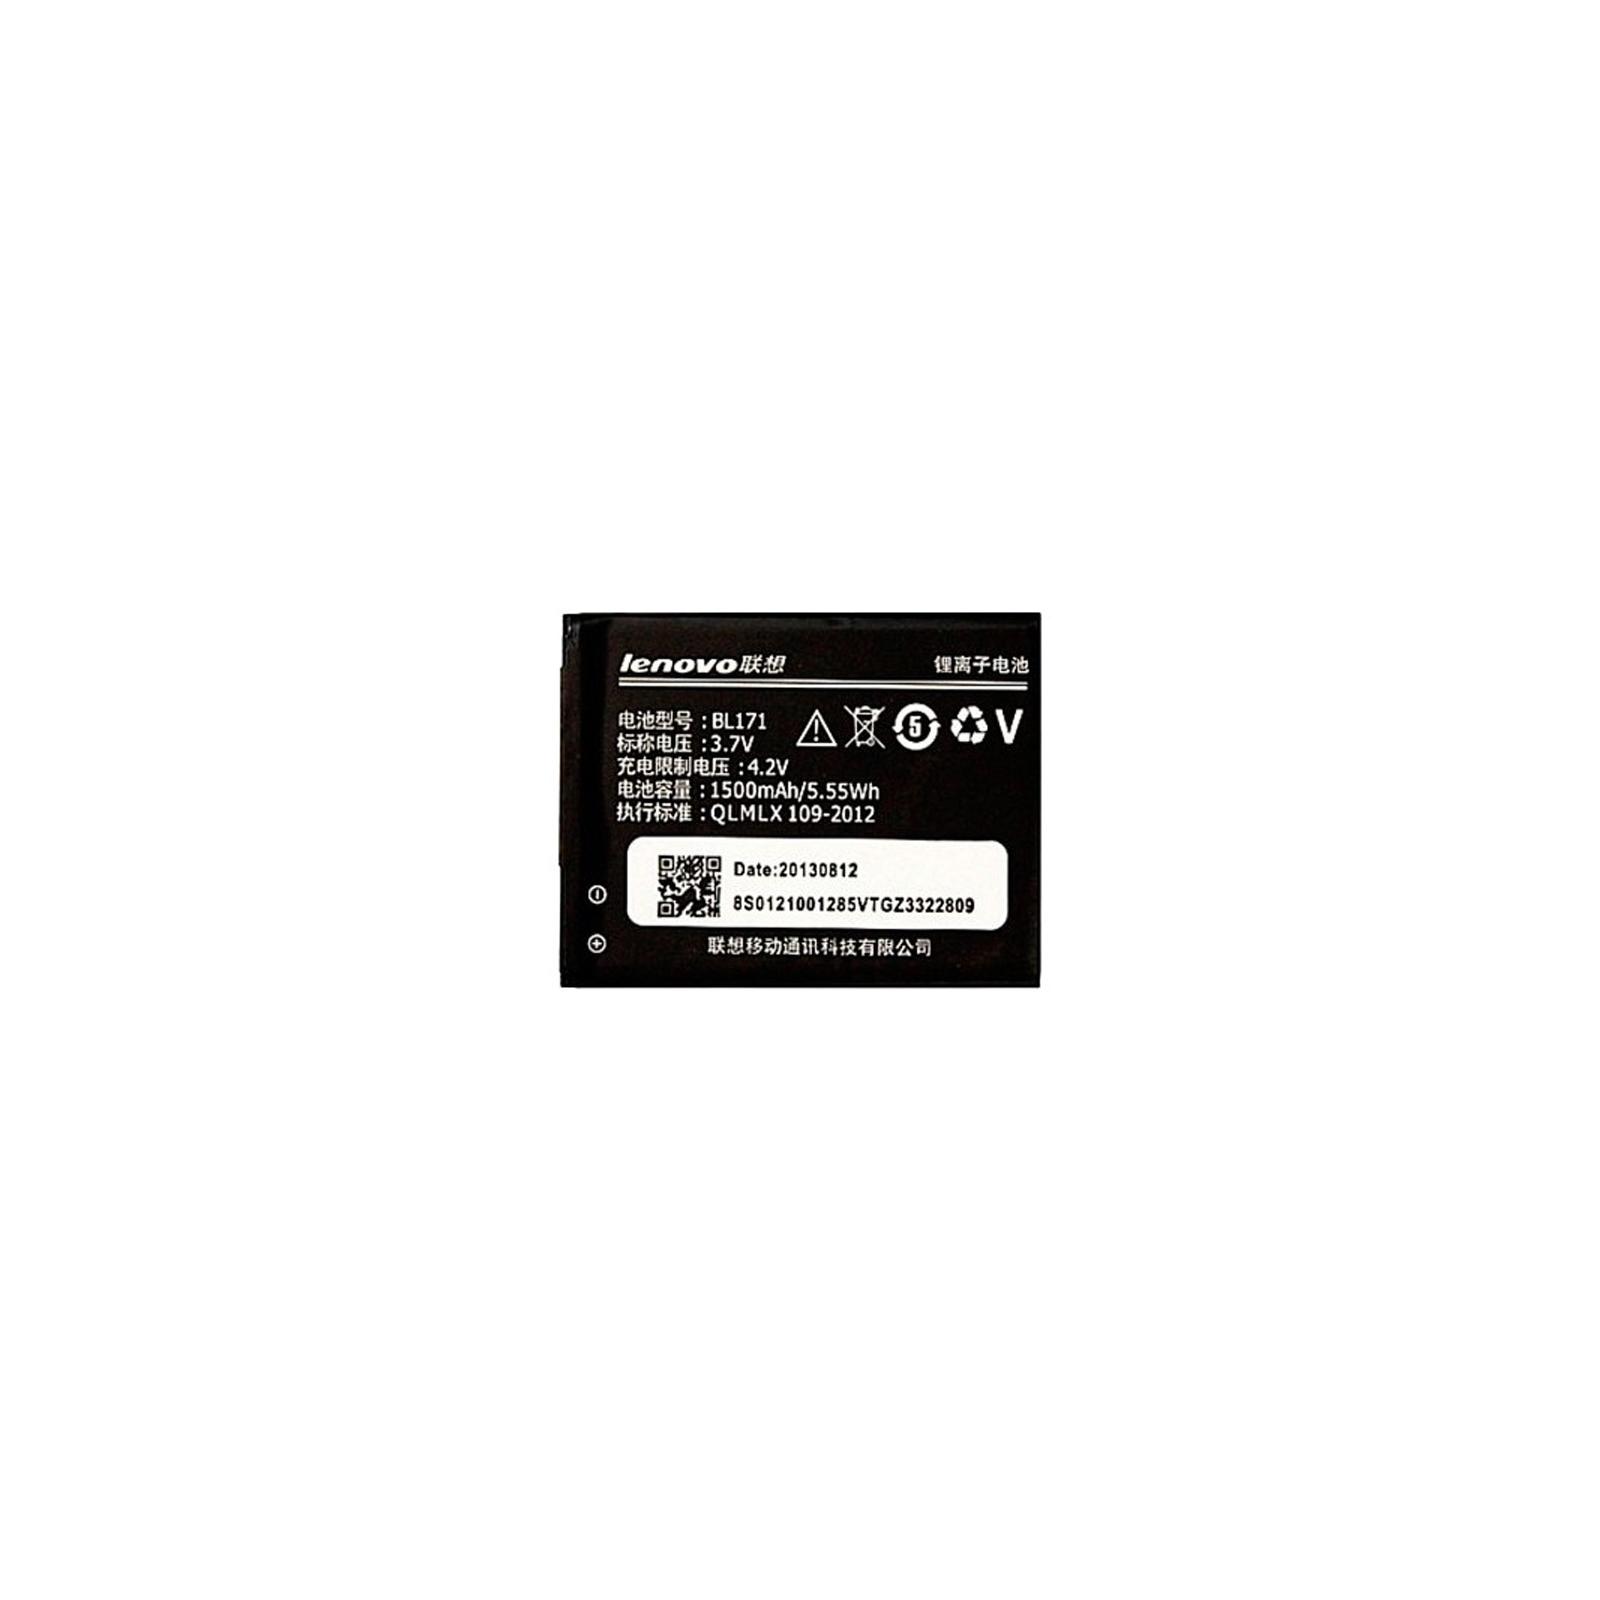 Акумуляторна батарея Lenovo for A390/A319/A356/A358/A368/A376/A500/A60/A65 (BL-171 / 37266)